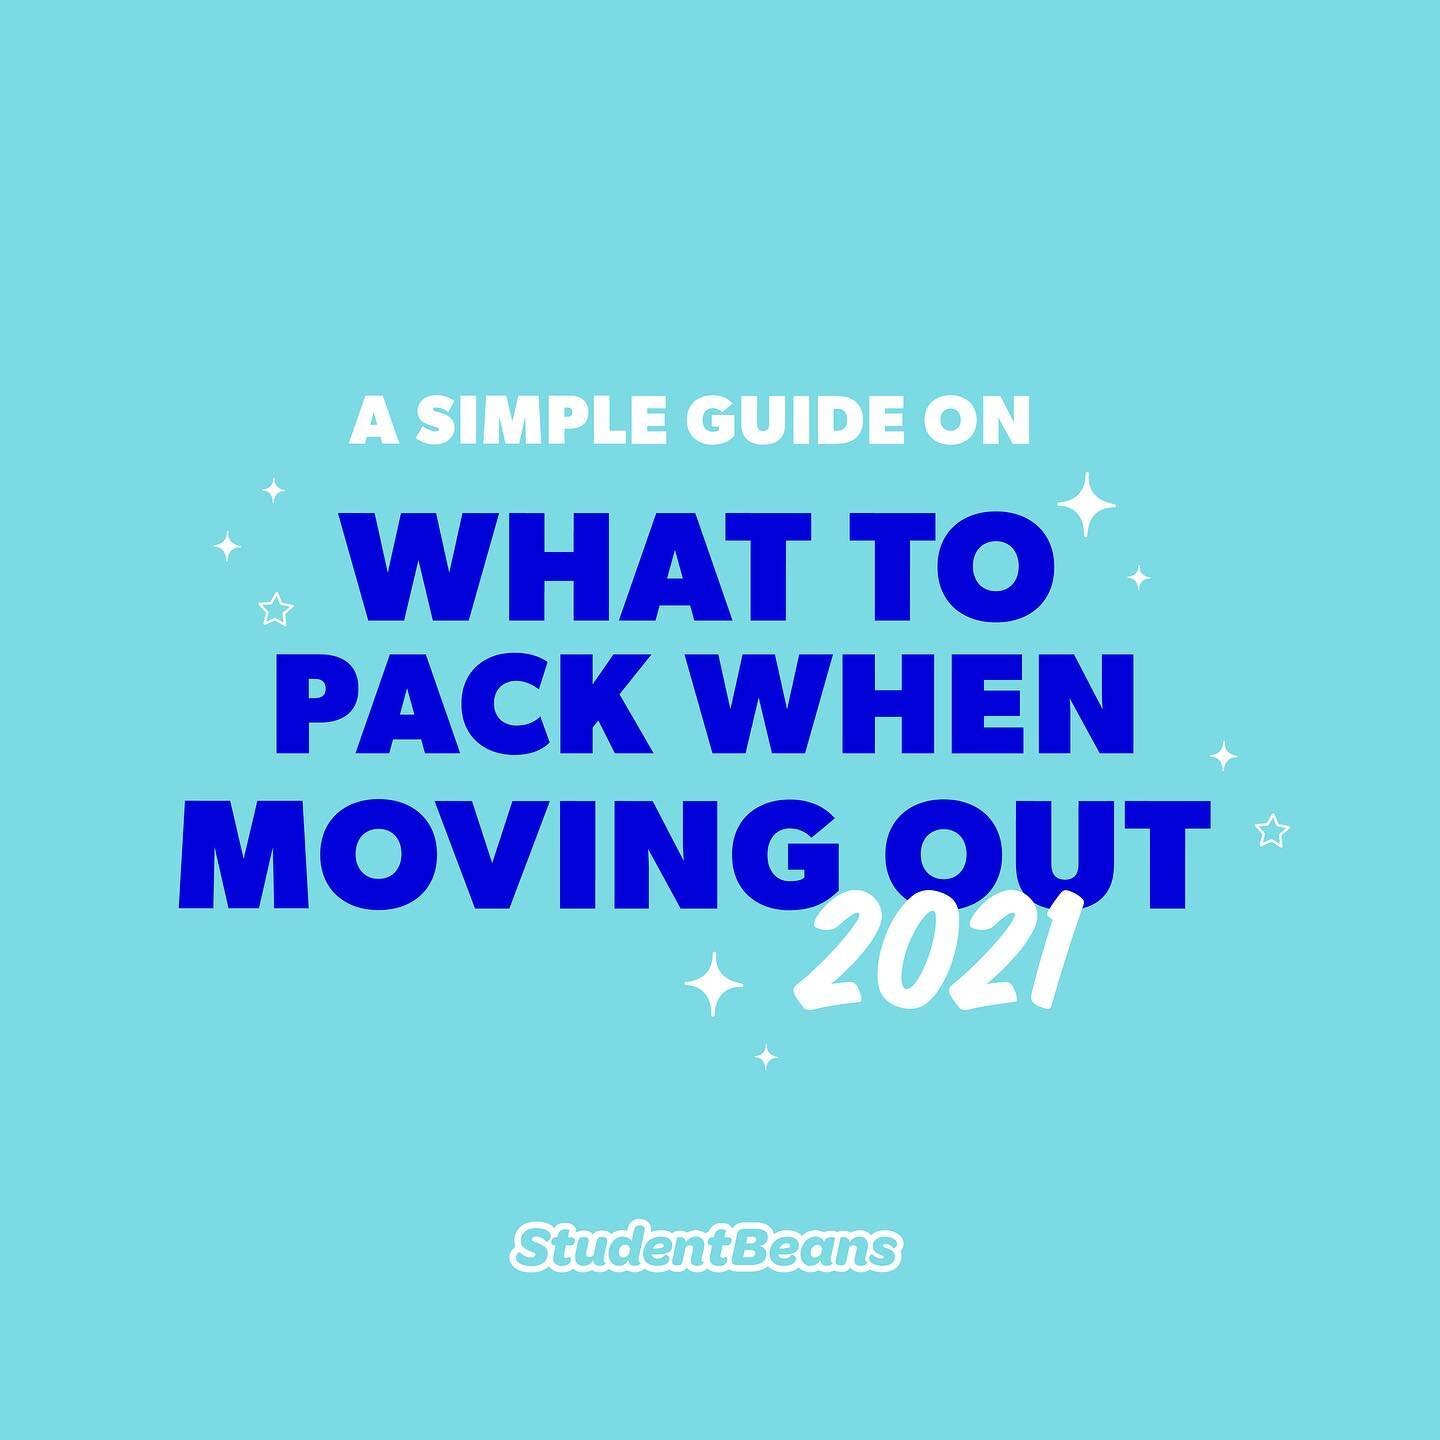 Incase you&rsquo;re moving and need a helping hand this list will be super handy so don&rsquo;t forget to save it for moving day 📦📦
.
.
Follow us for more fun content and giveaways 🇦🇺⠀⠀⠀
👉👉👉 @studentbeans_au 👈👈👈